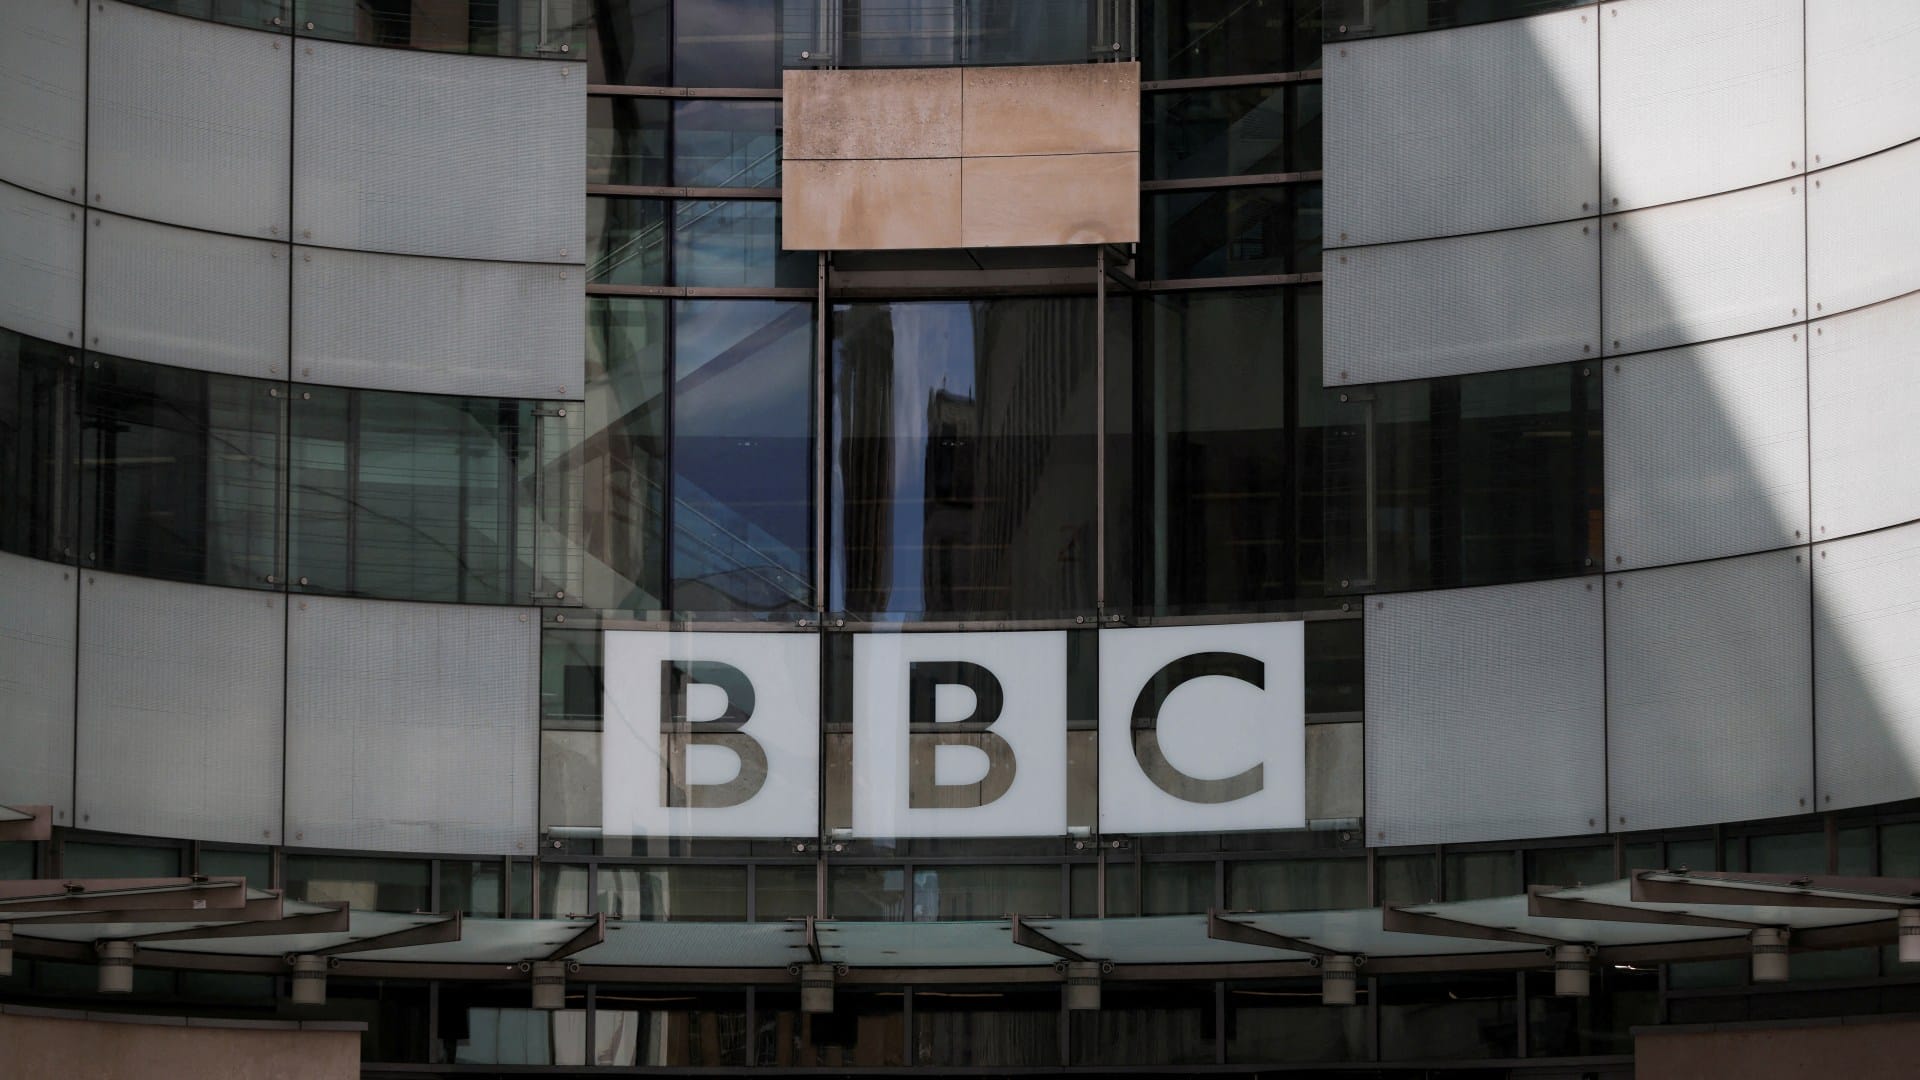 Final warning for BBC iPlayer users to watch downloaded shows now as app will close TOMORROW